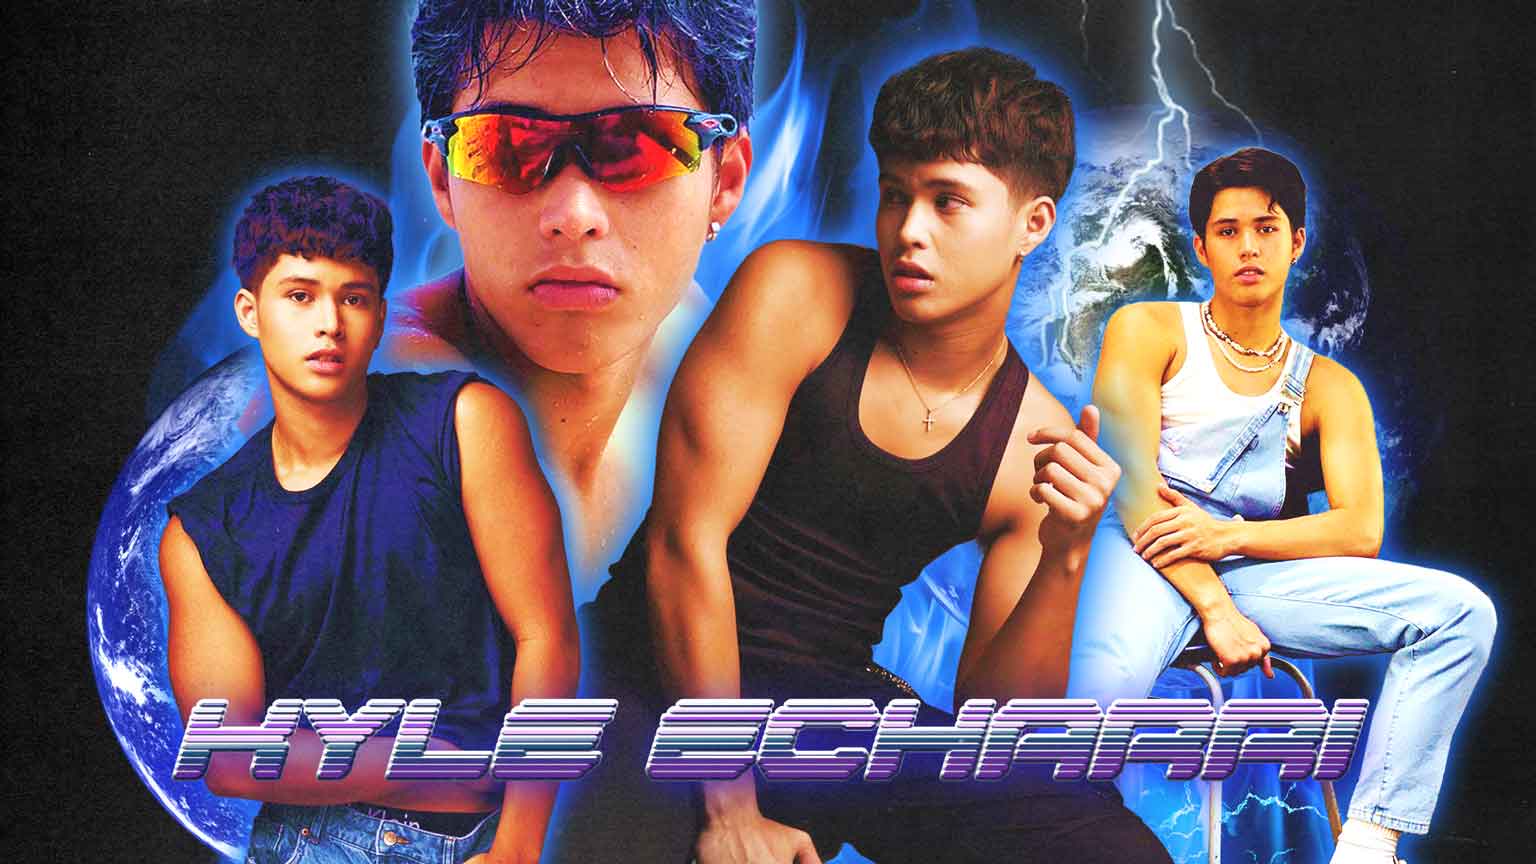 Kyle Echarri Is Ready To Show A New Side Of Himself